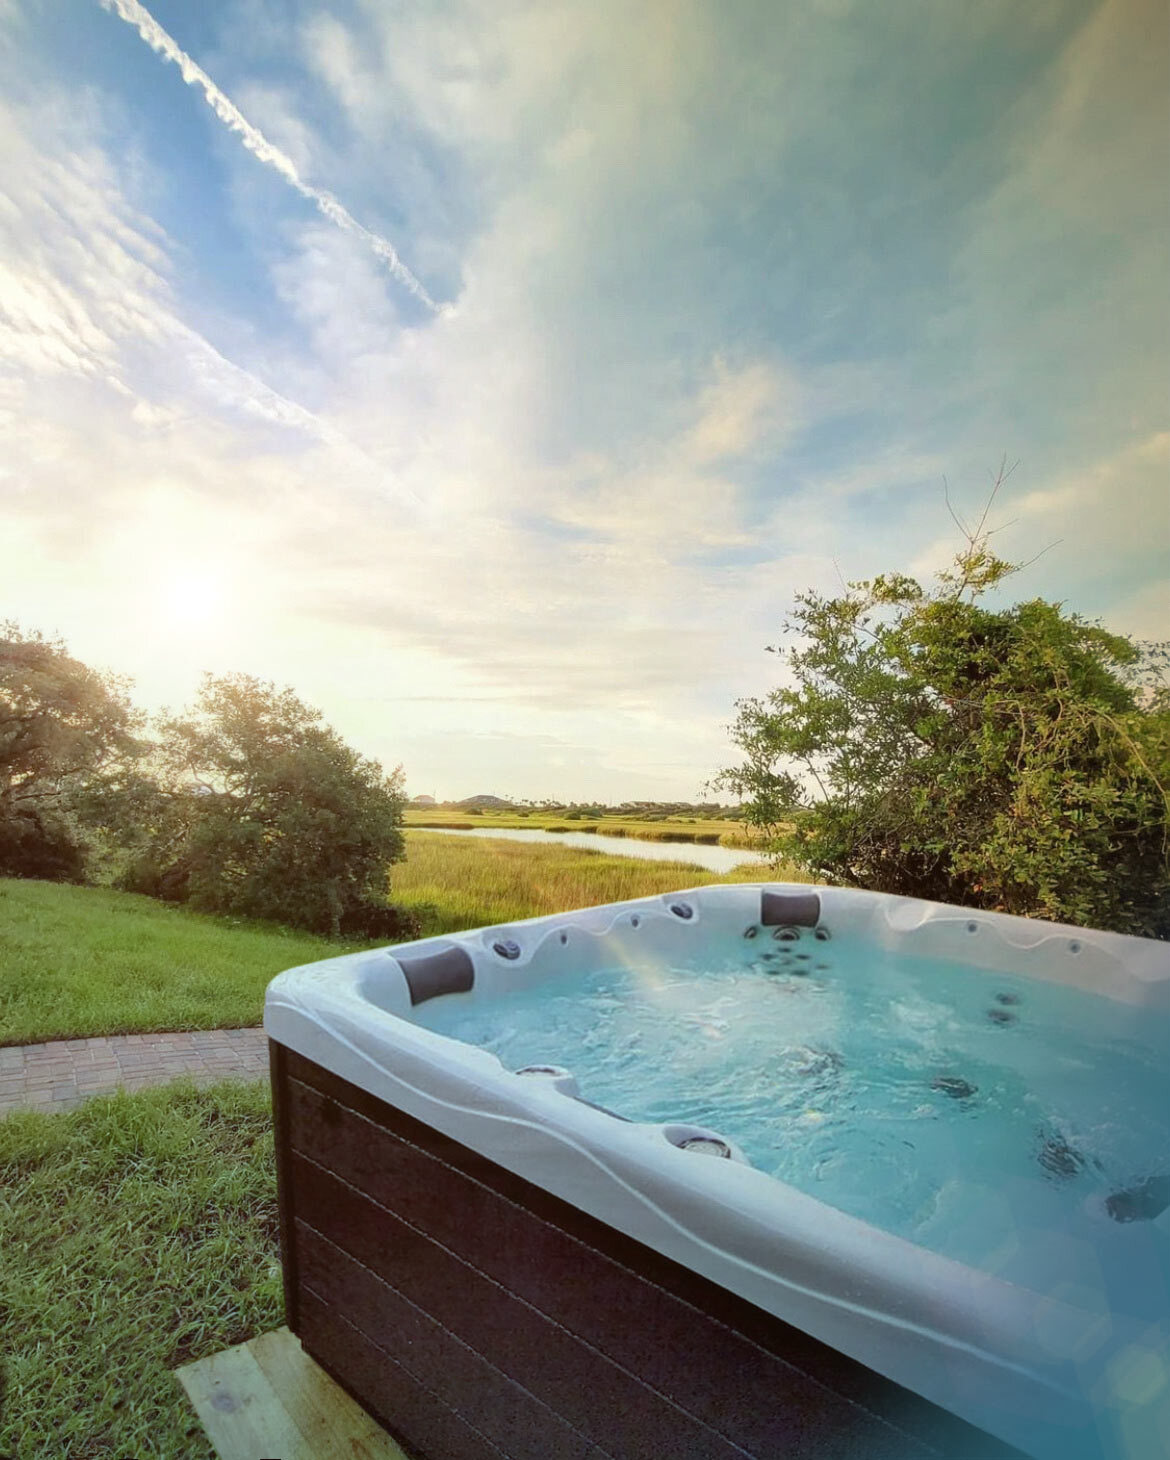 Make the most of your property and its surrounding views. This Clarity hot tub was strategically installed so soakers can take in the view of the St. Augustine waterway.